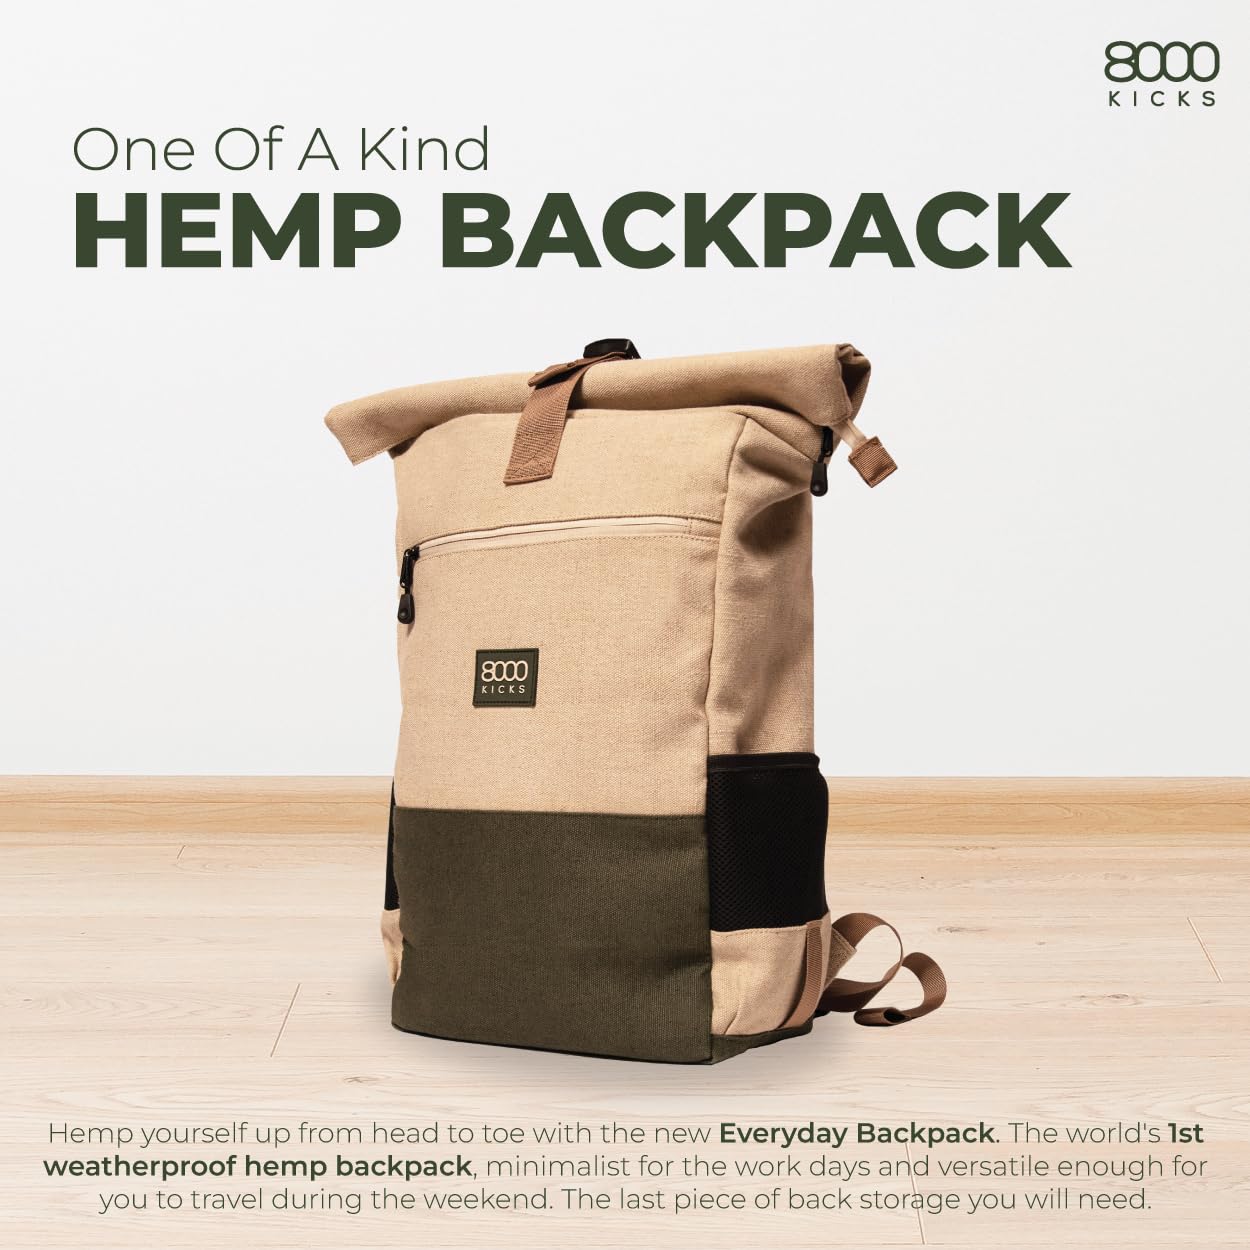 8000Kicks Everyday Hemp Backpack - Lightweight and Weatherproof Backpack for Work and Travel with Anti-theft pocket and Spacious Interior (Navy)